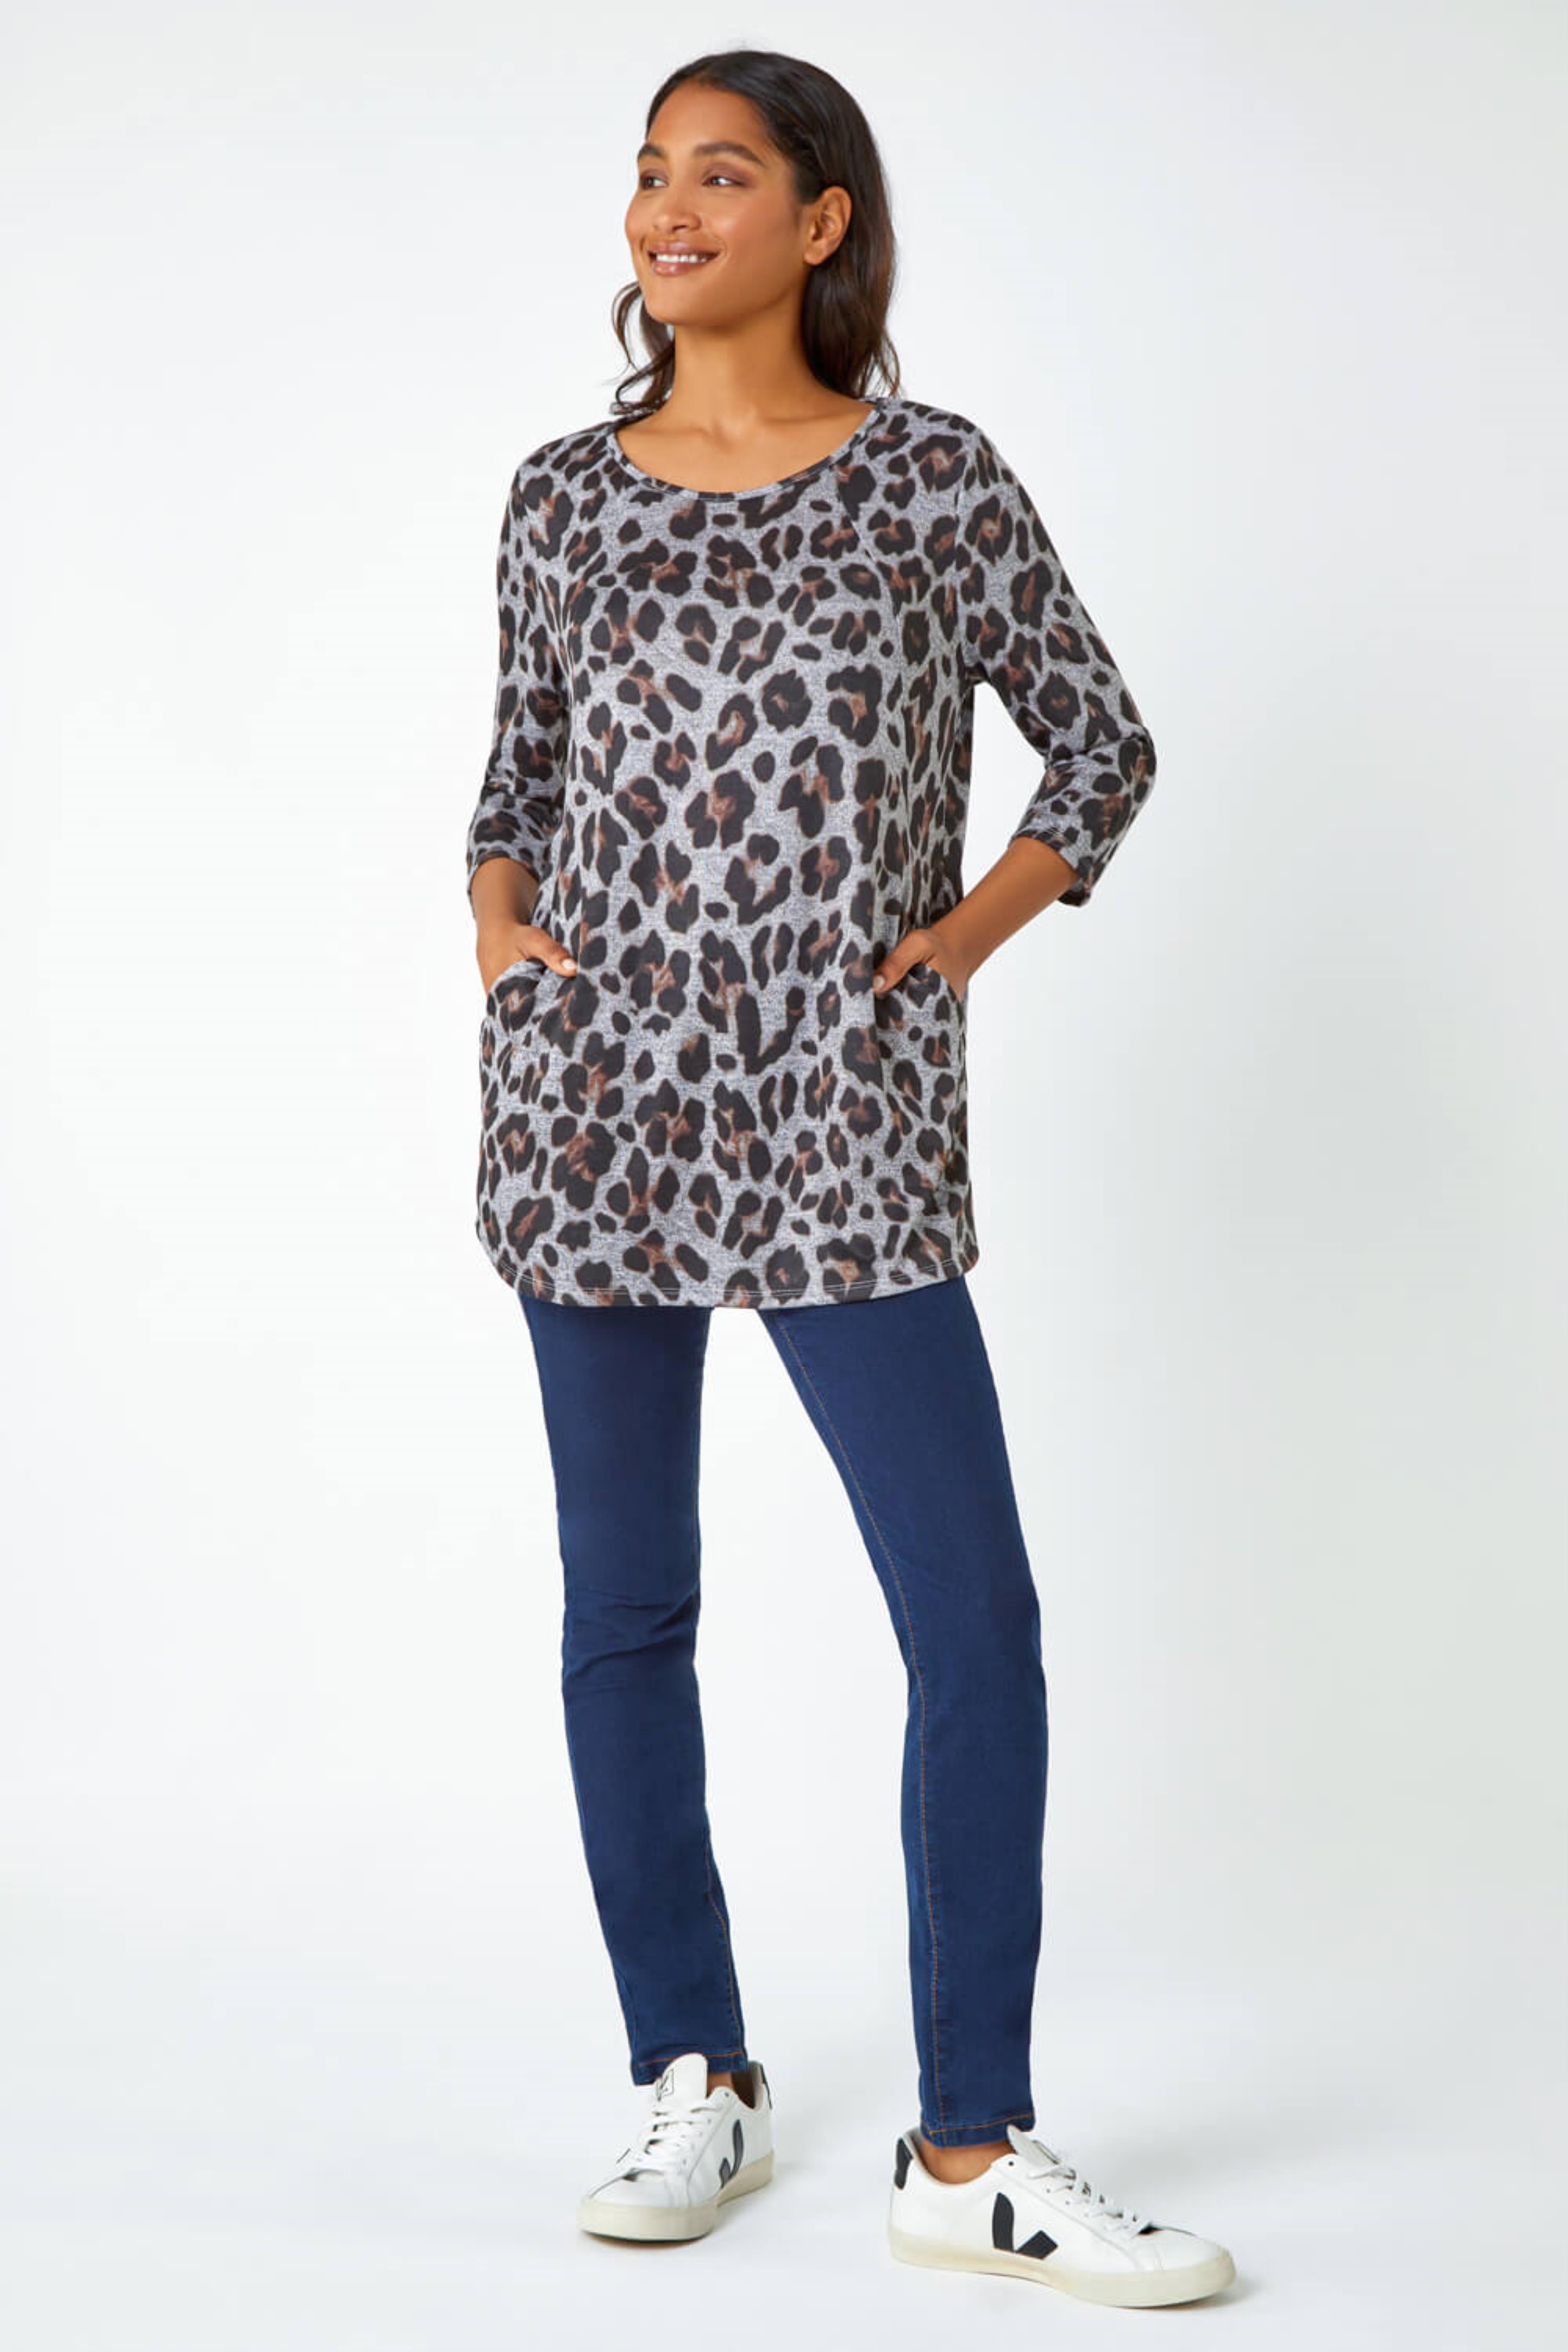 Neutral Animal Print Pocket Top with Snood, Image 2 of 5